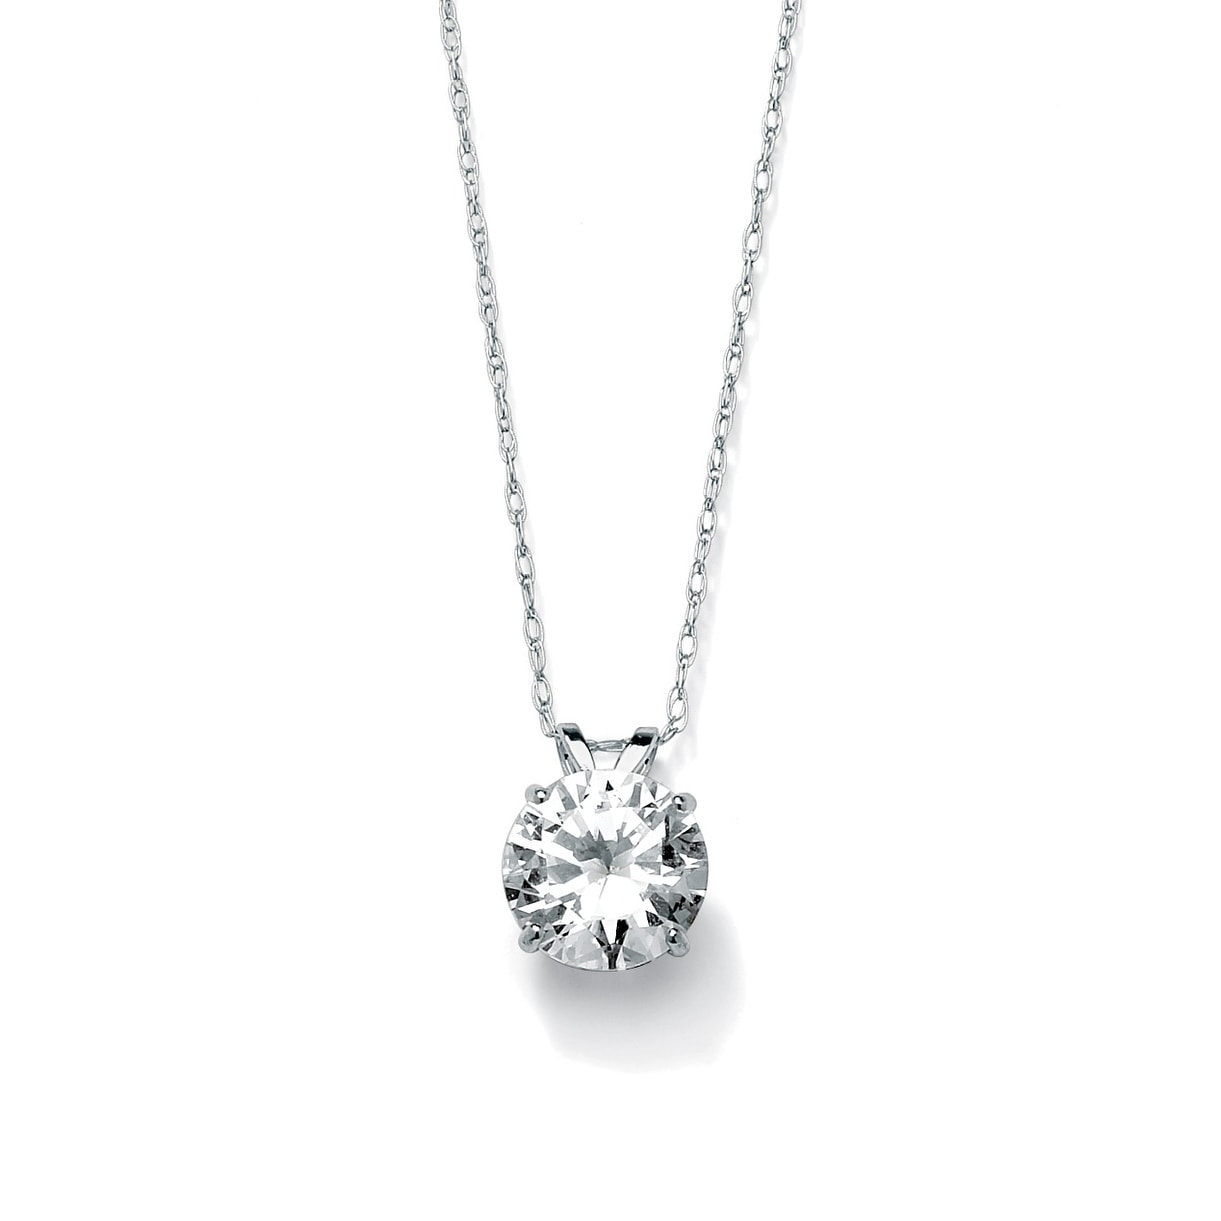 10k White Gold 2.00 Ct Radiant Cut Simulated Diamond Solitaire Pendant With 18 Chain .925 Silver